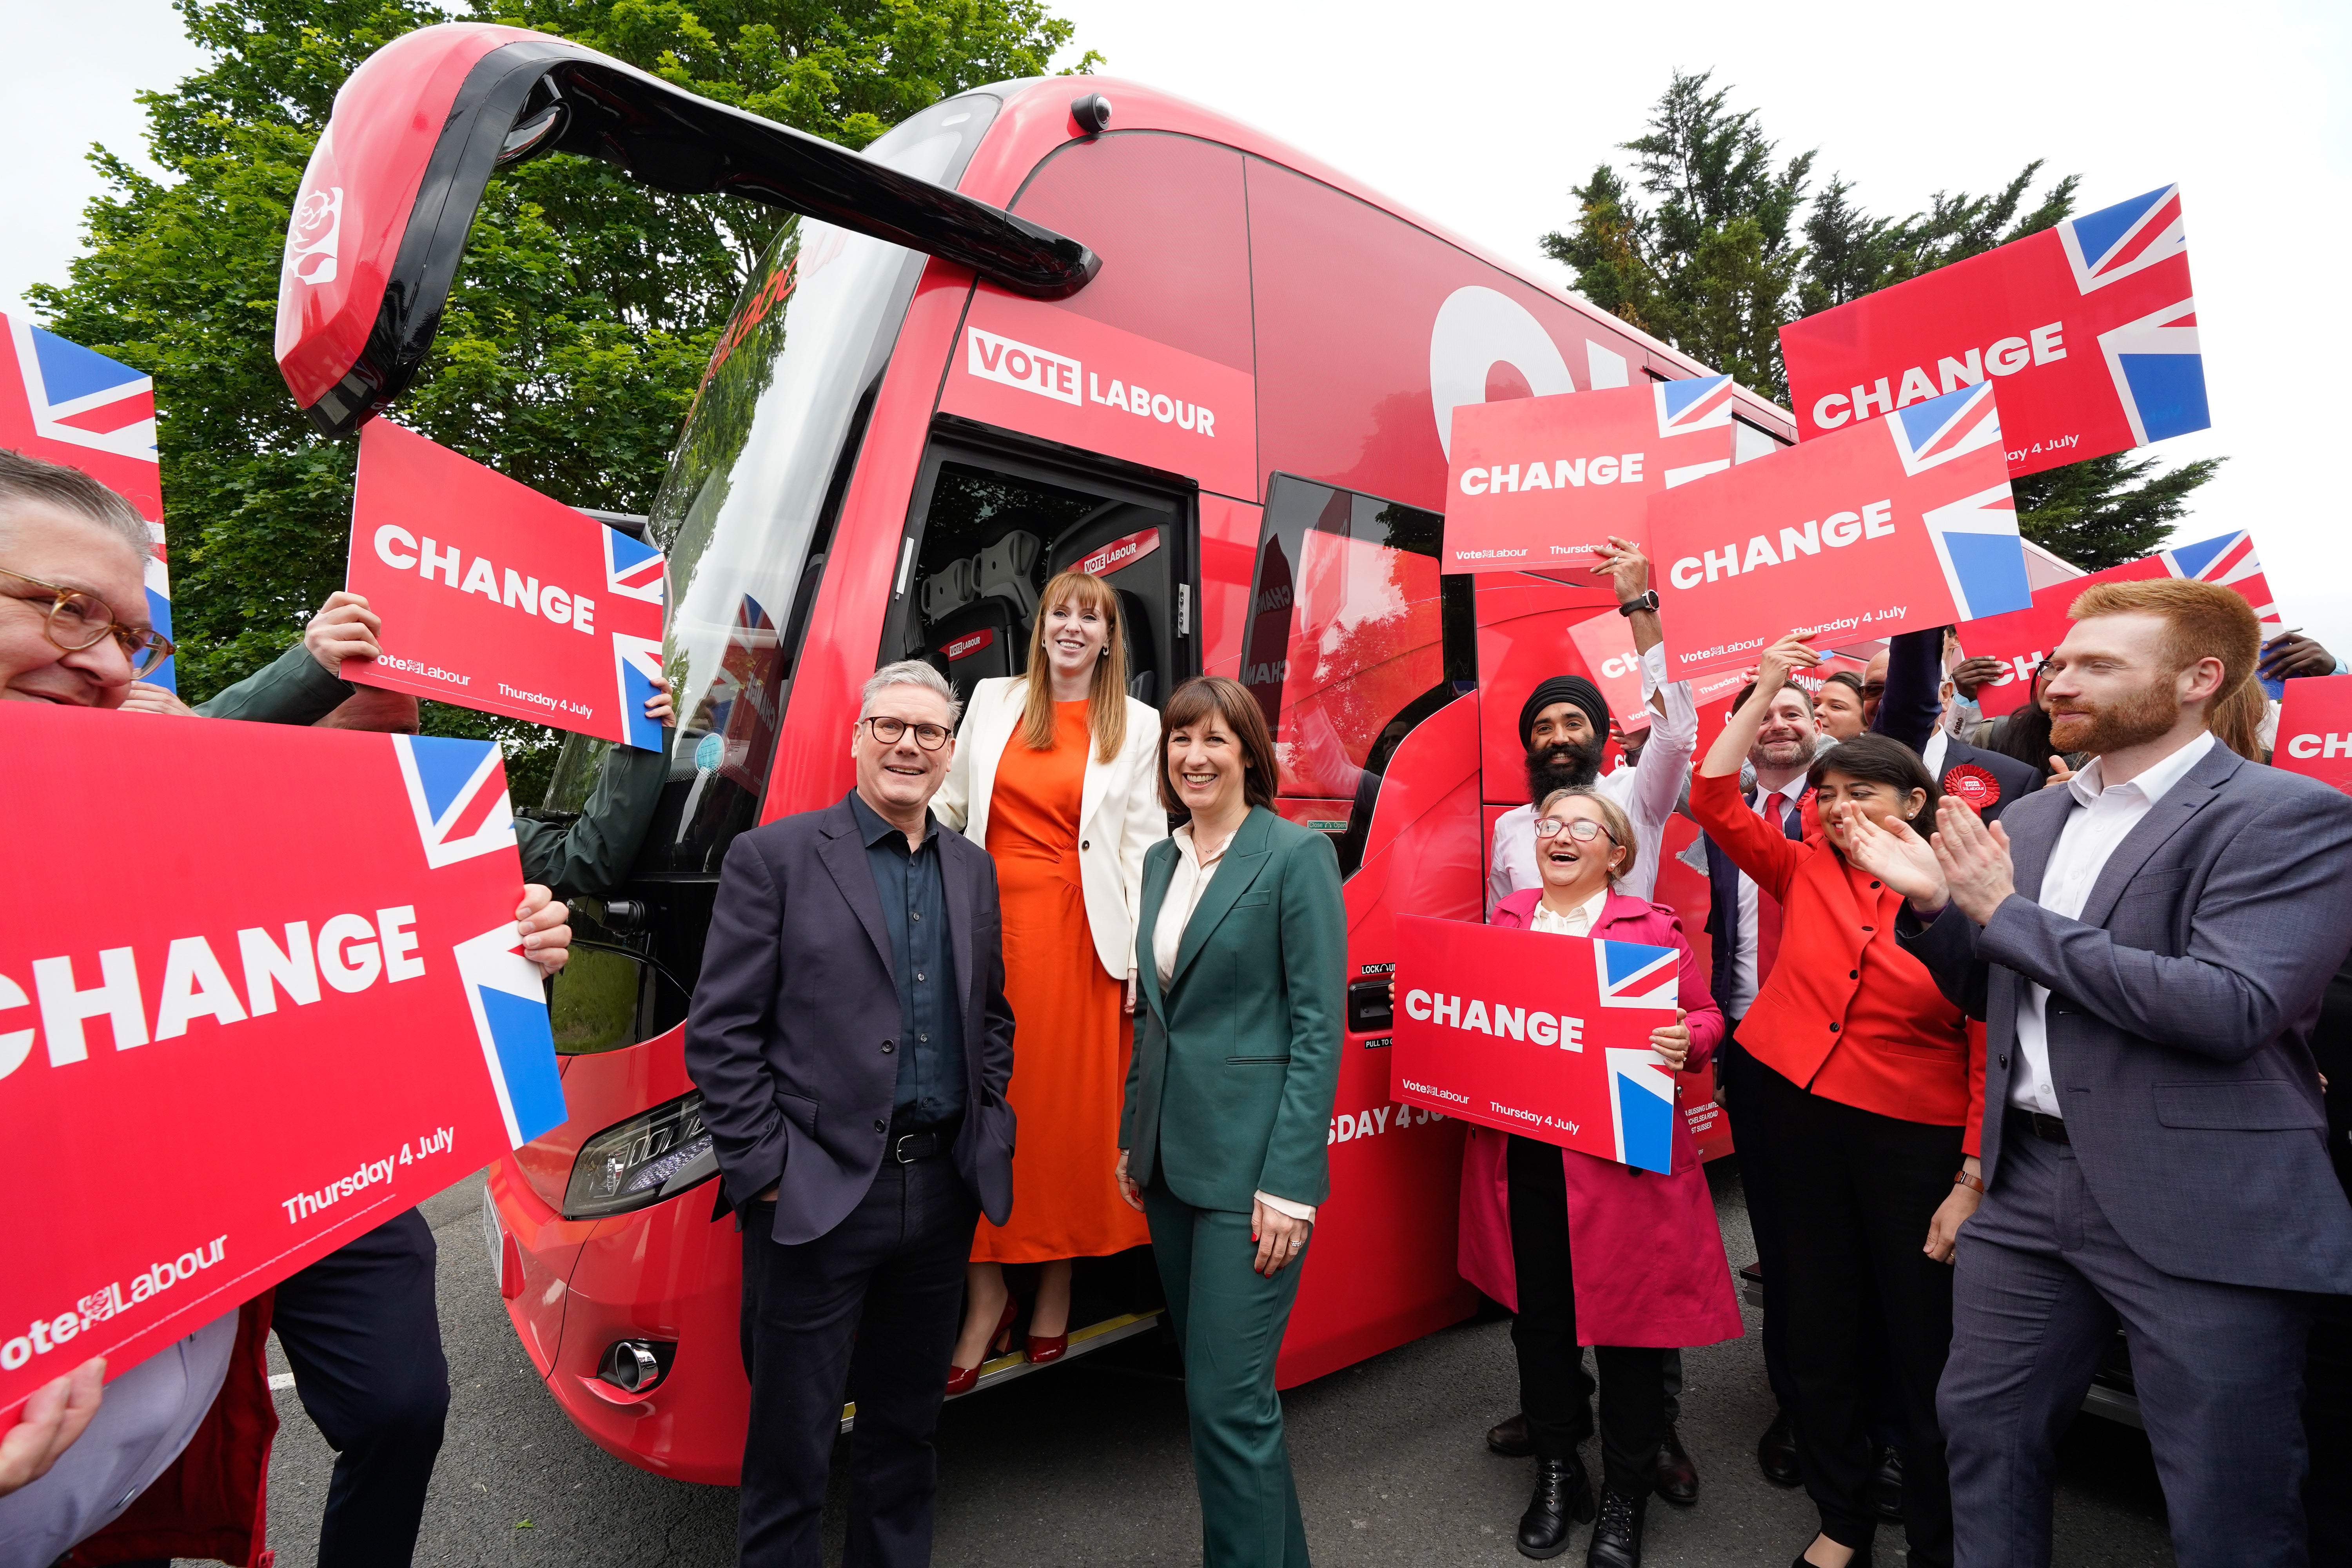 Deputy Labour leader Angela Rayner departs on the campaign bus